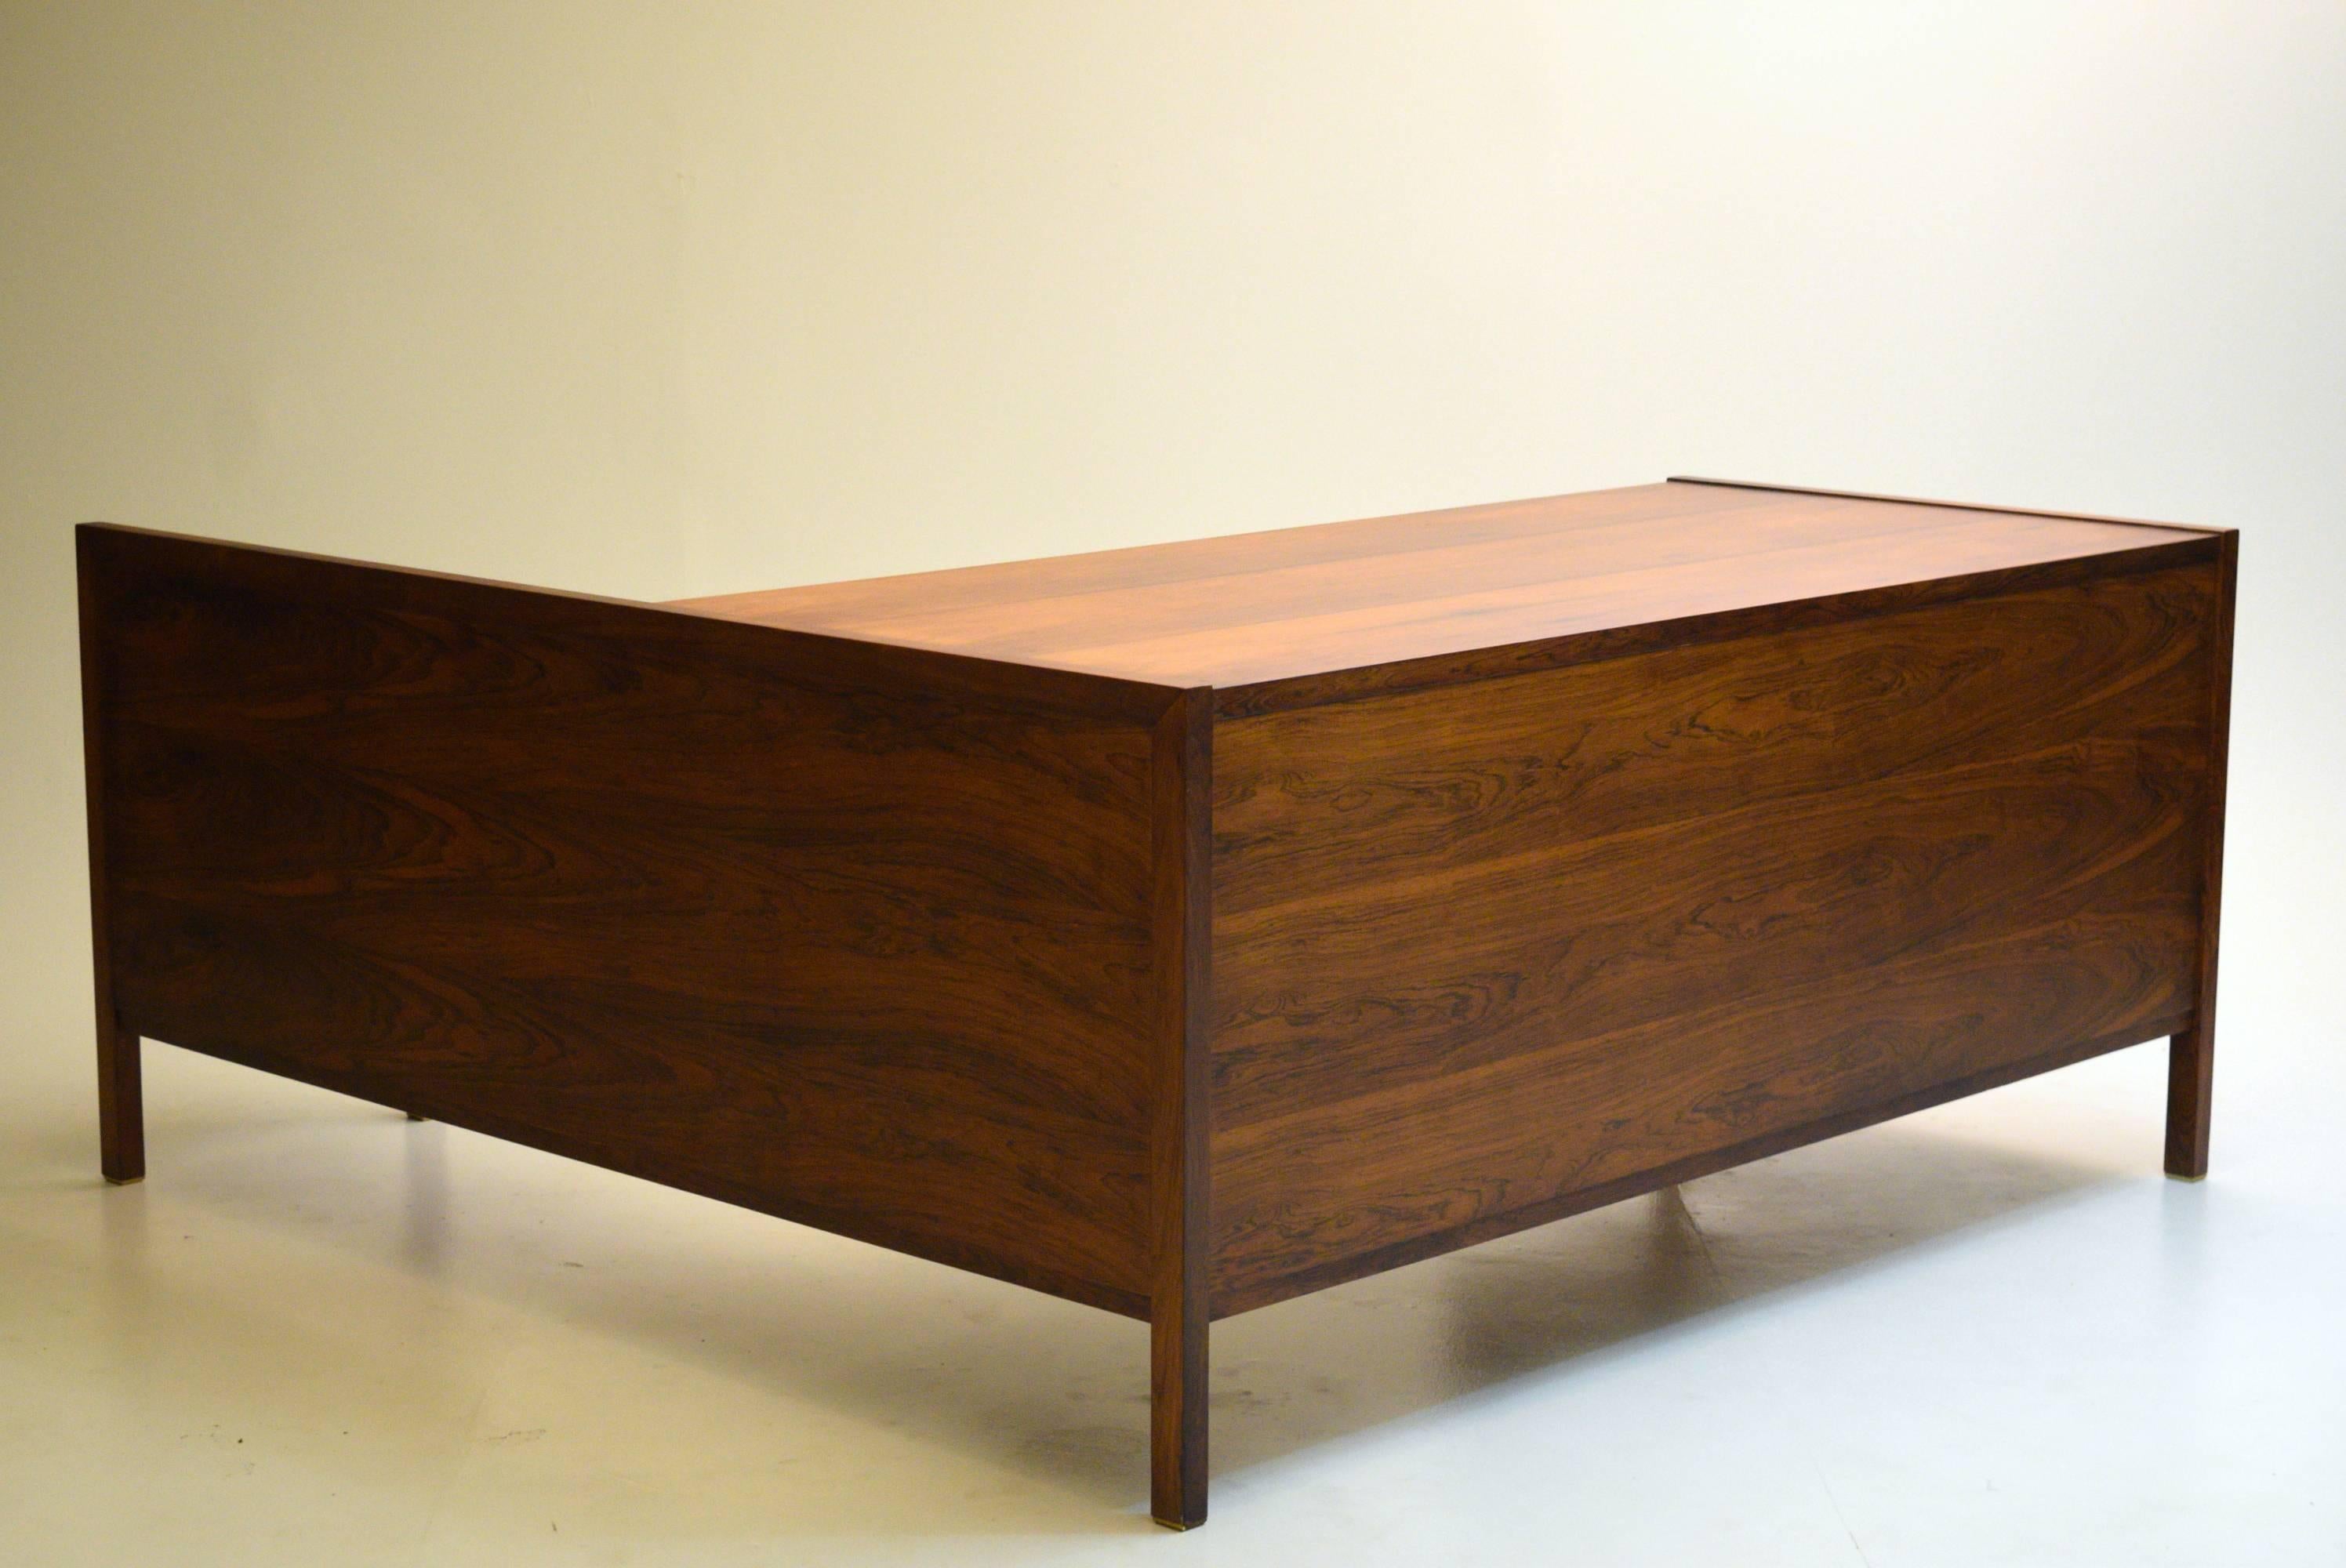 A rare all-rosewood desk with return built in by Dunbar, designed by Edward Wormley. Normally rosewood is used as a highlight feature on desks, whereas here we see a decadent use of the material over the entire piece, to the undersides and invisible